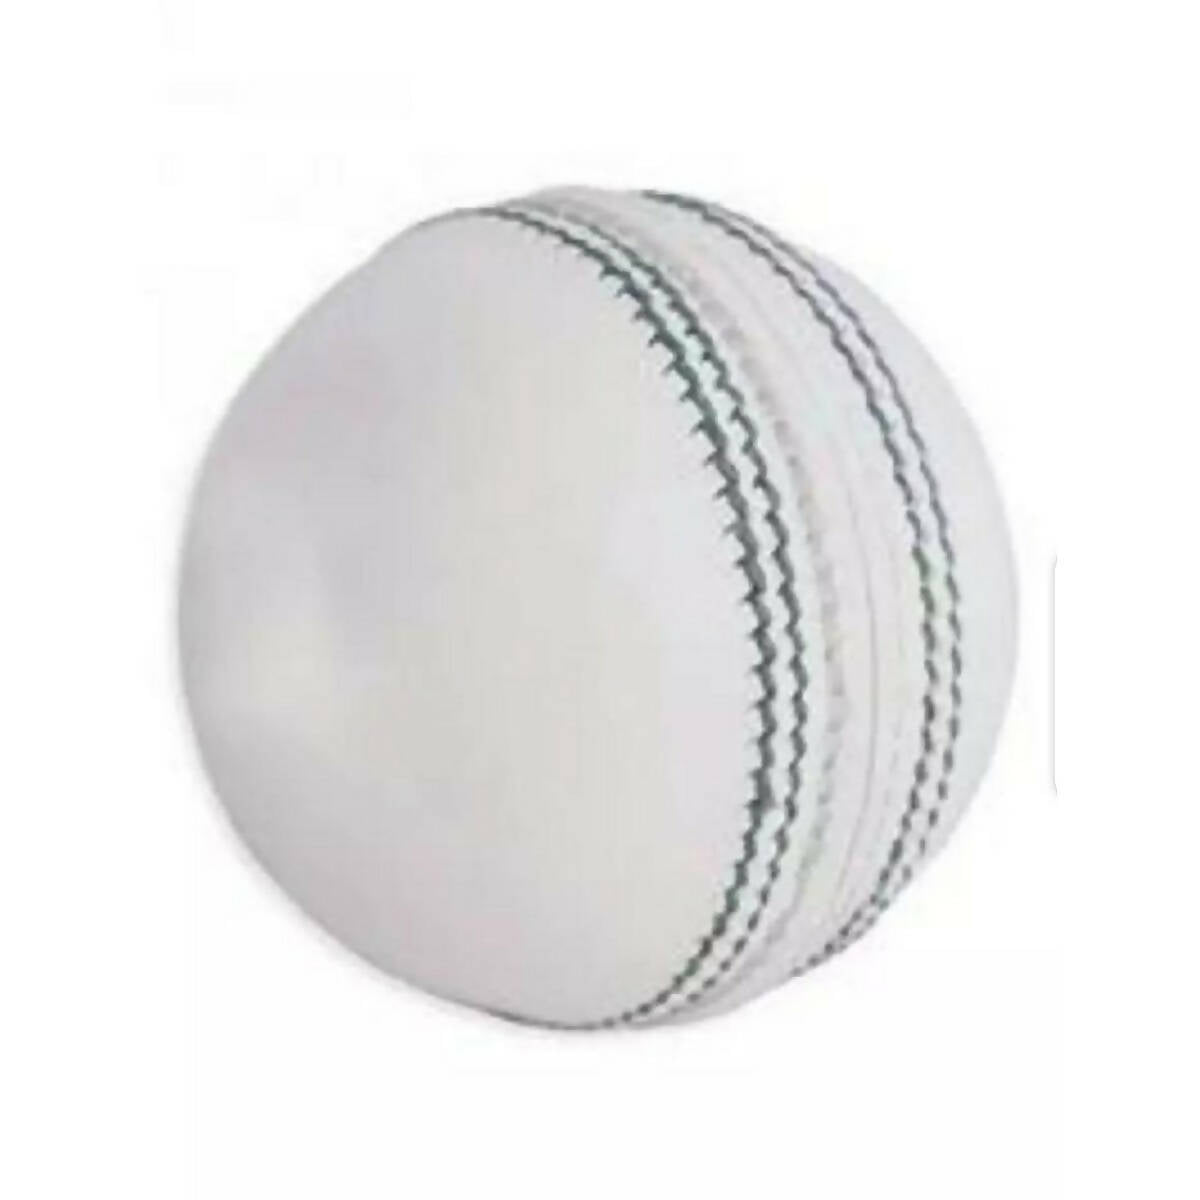 Sports Soft Indoor Rubber practice ball Cricket Ball Practice Ball